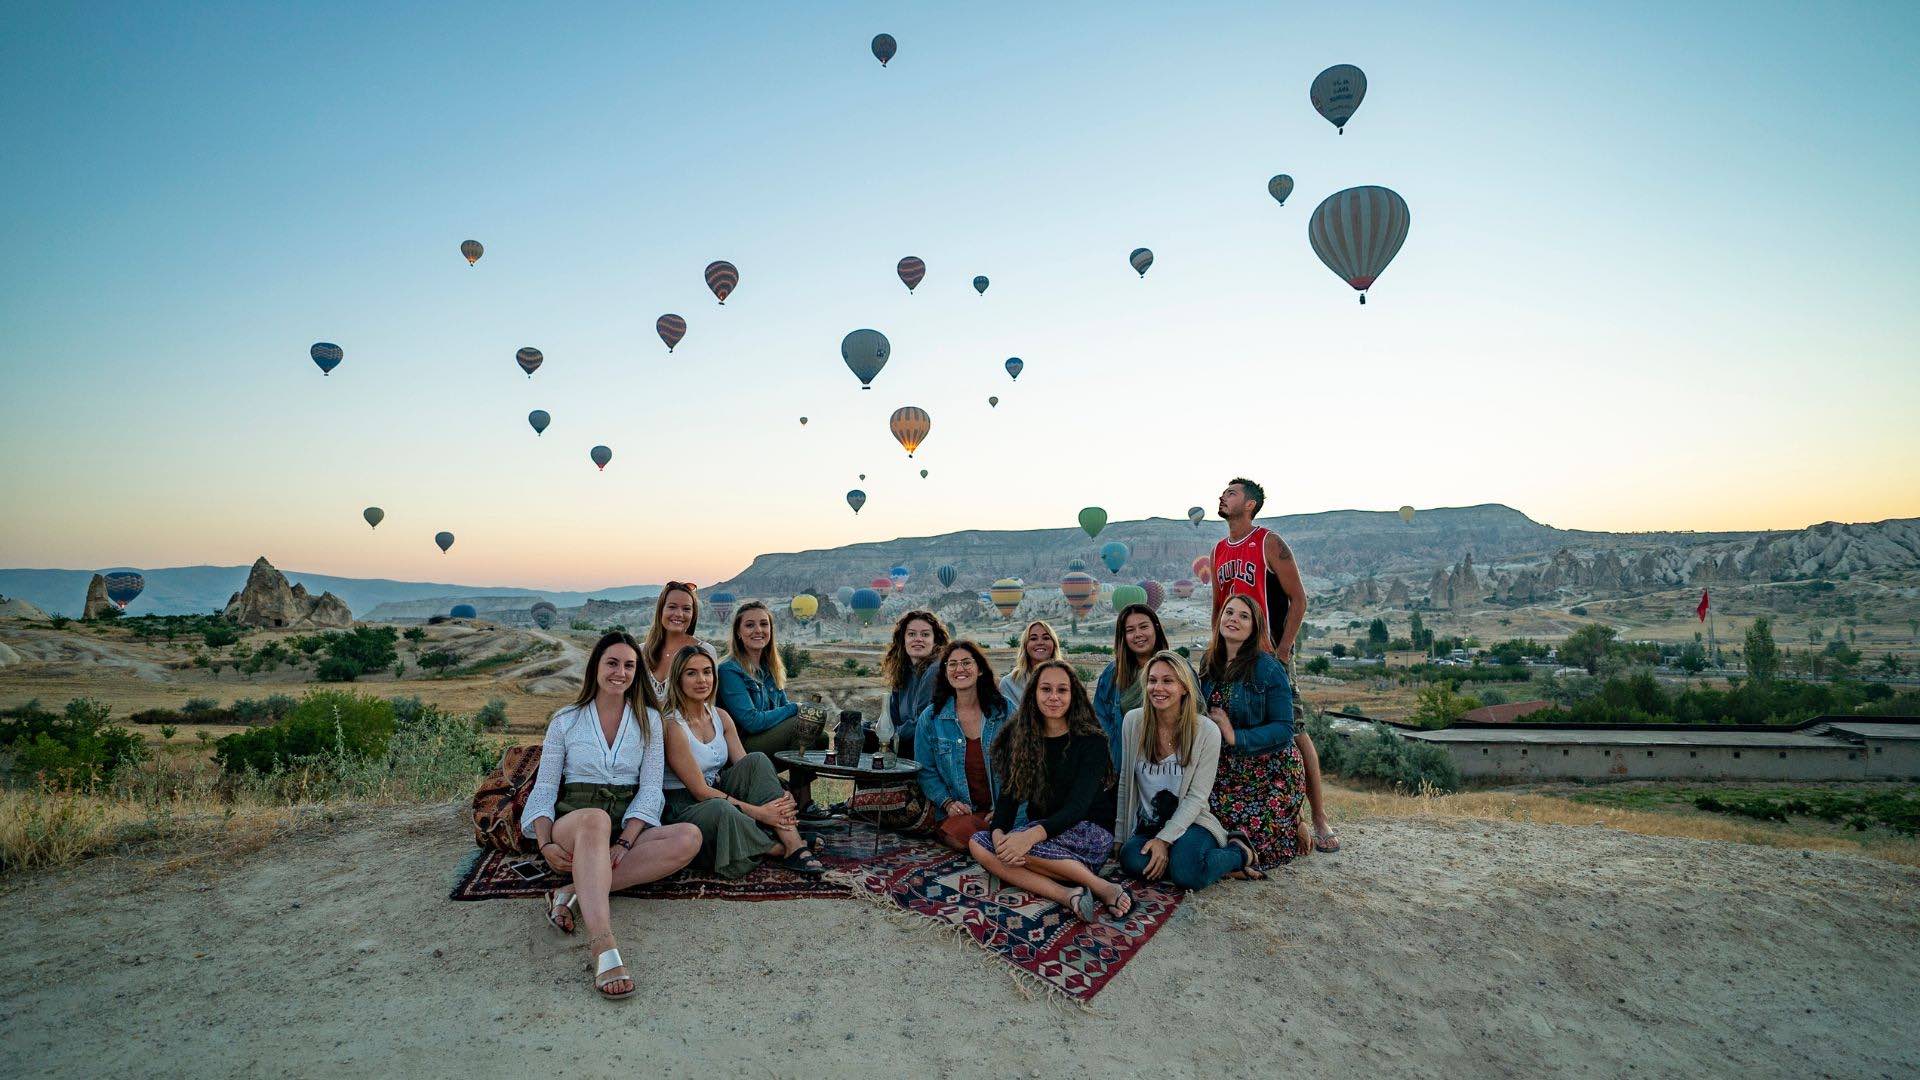 Experiences Best Shared: How to Make Friends for Life on an Adventure of a Lifetime